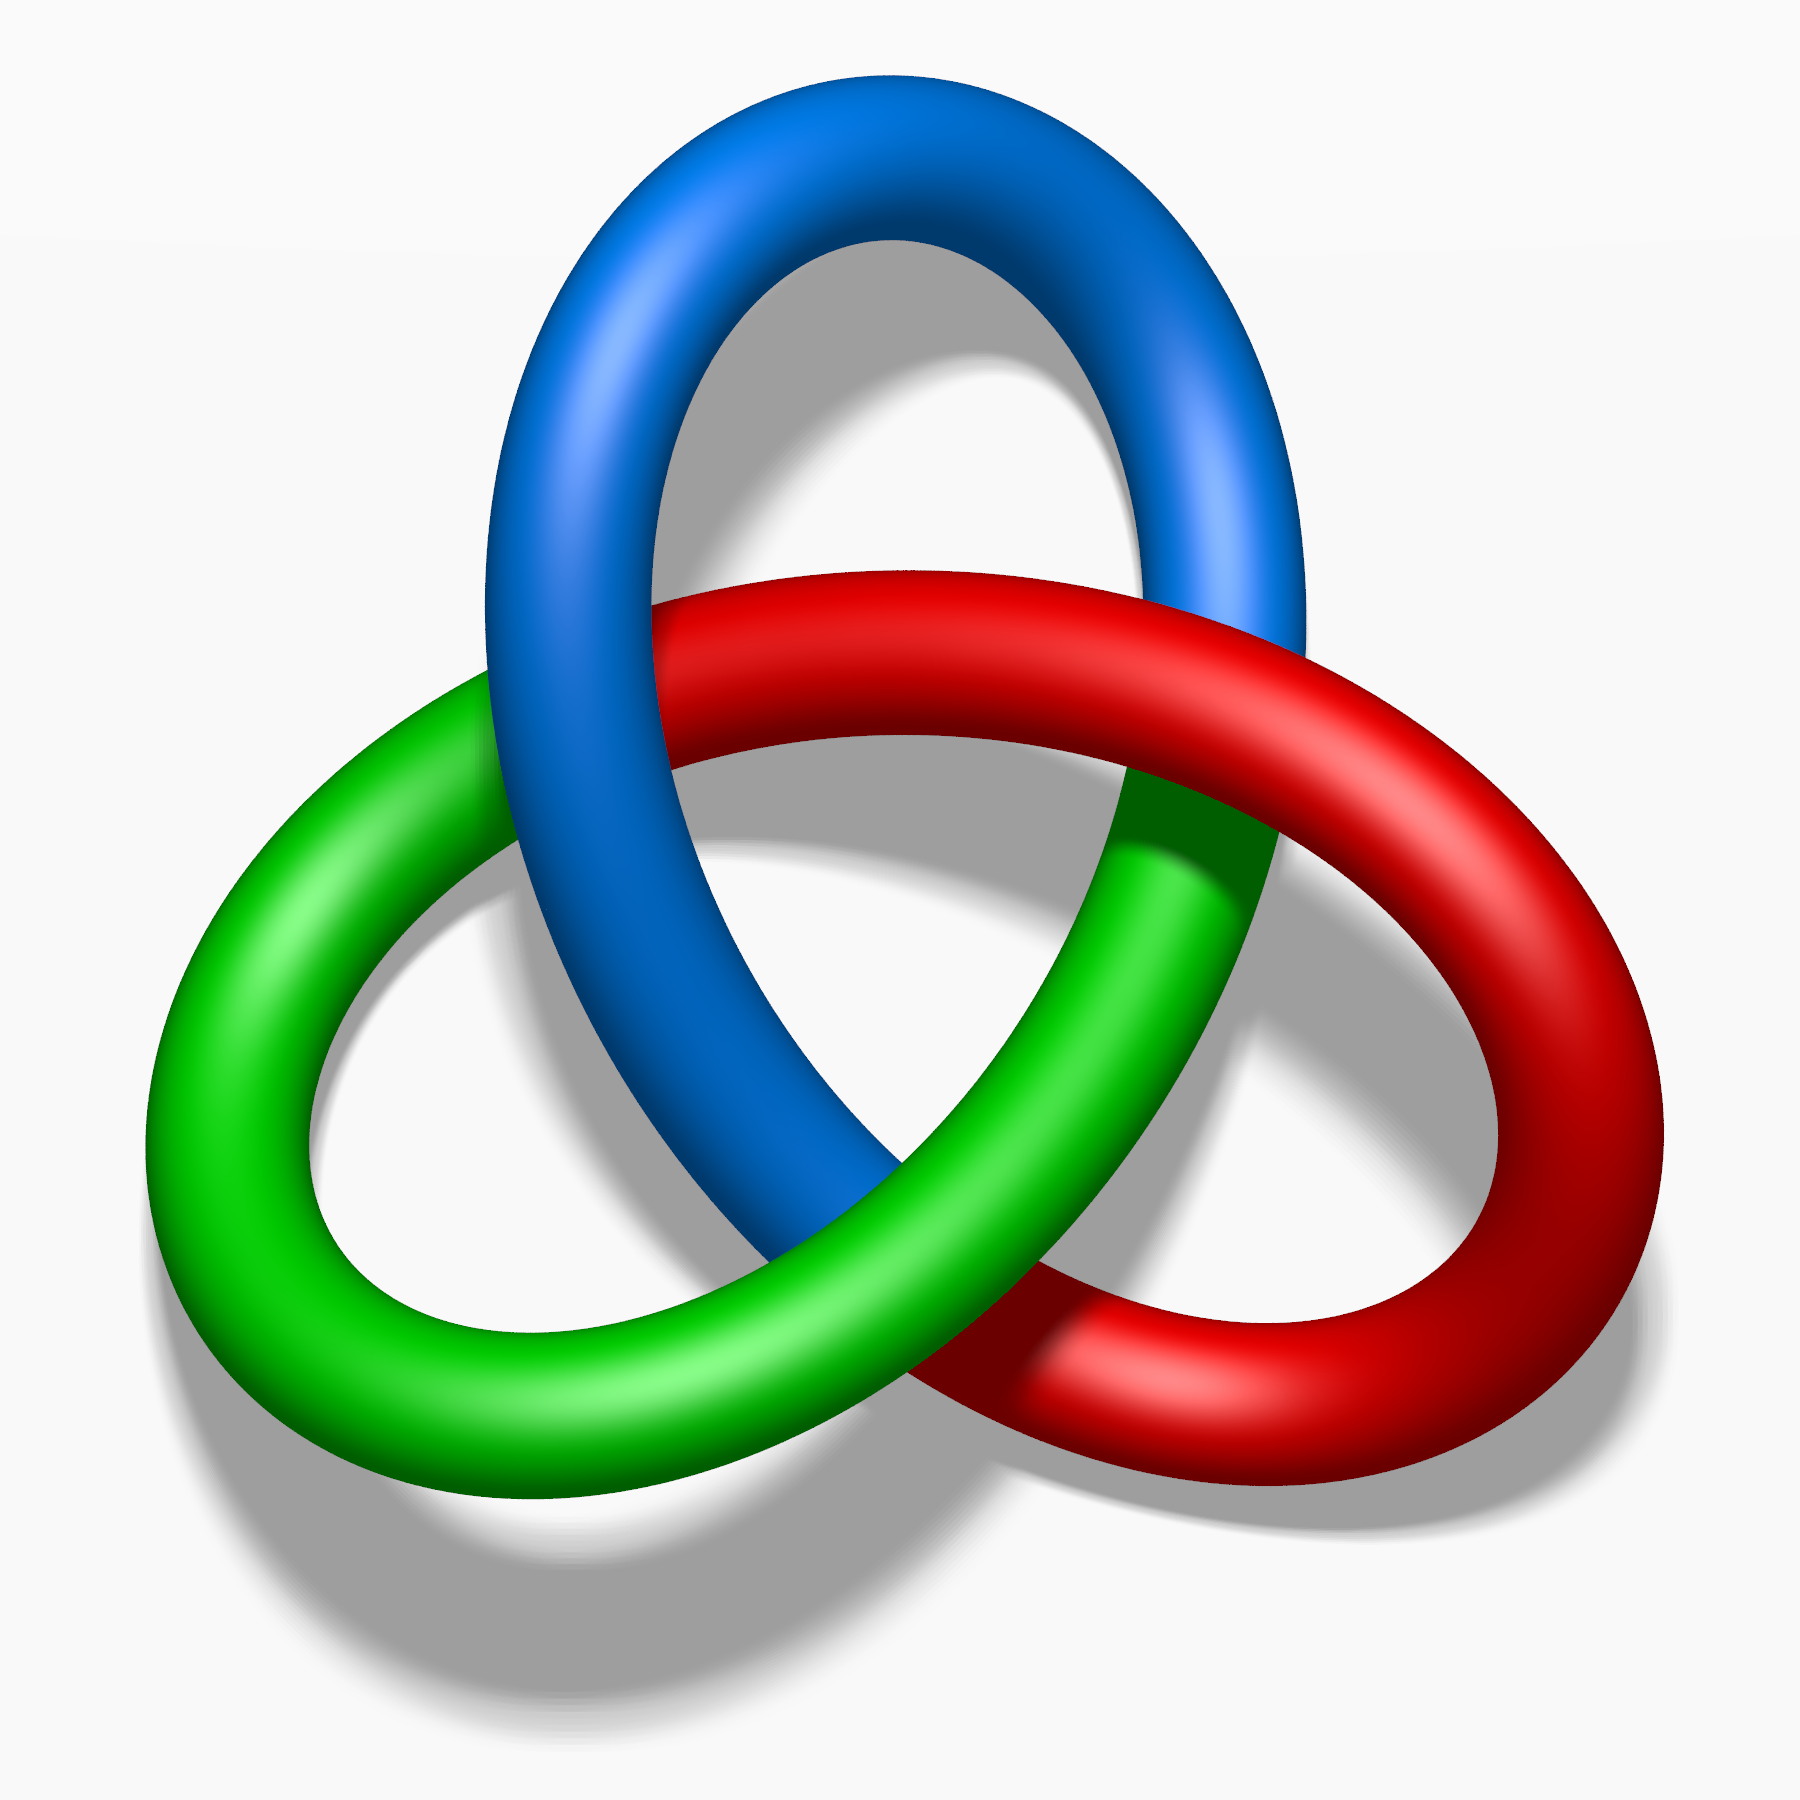 A trefoil knot with tricoloring. Each of the three loops of the knot is colored differently, one in blue, one in red, one in green